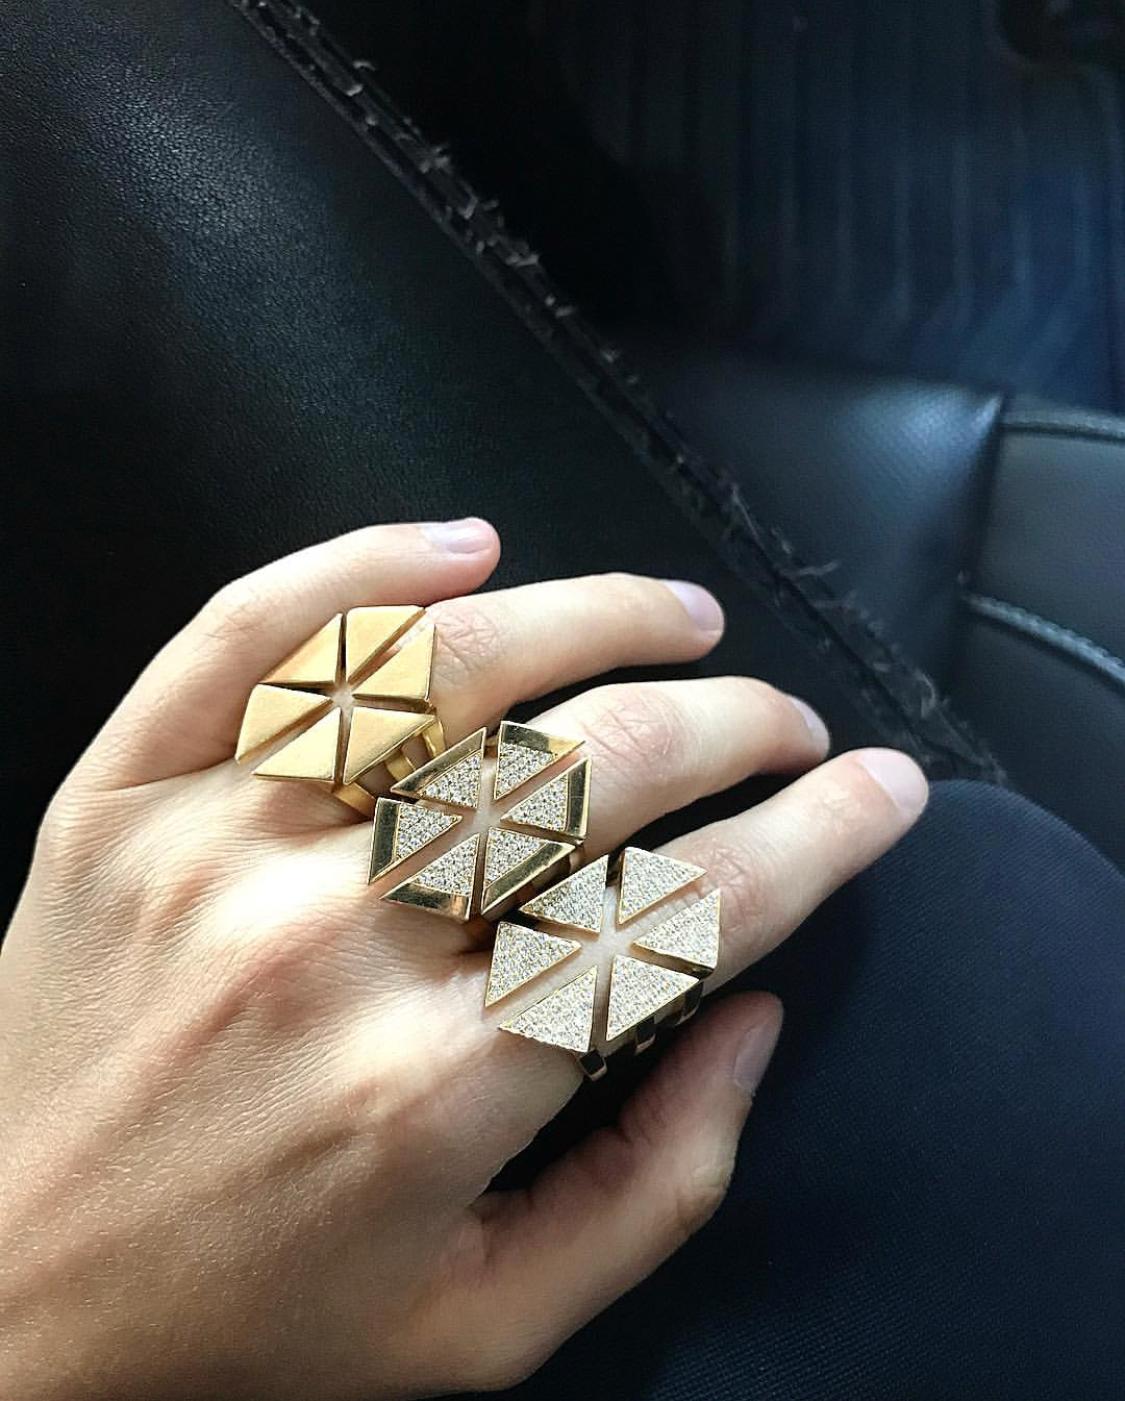 18k Yellow Gold Diamond Triangle Geometric Ring features a floating triangle pattern with a white diamond center and solid gold triple bar band
18k brushed Yellow Gold finish
From Karma El Khalil's Classics Collection 
Style with Karma El Khalil's